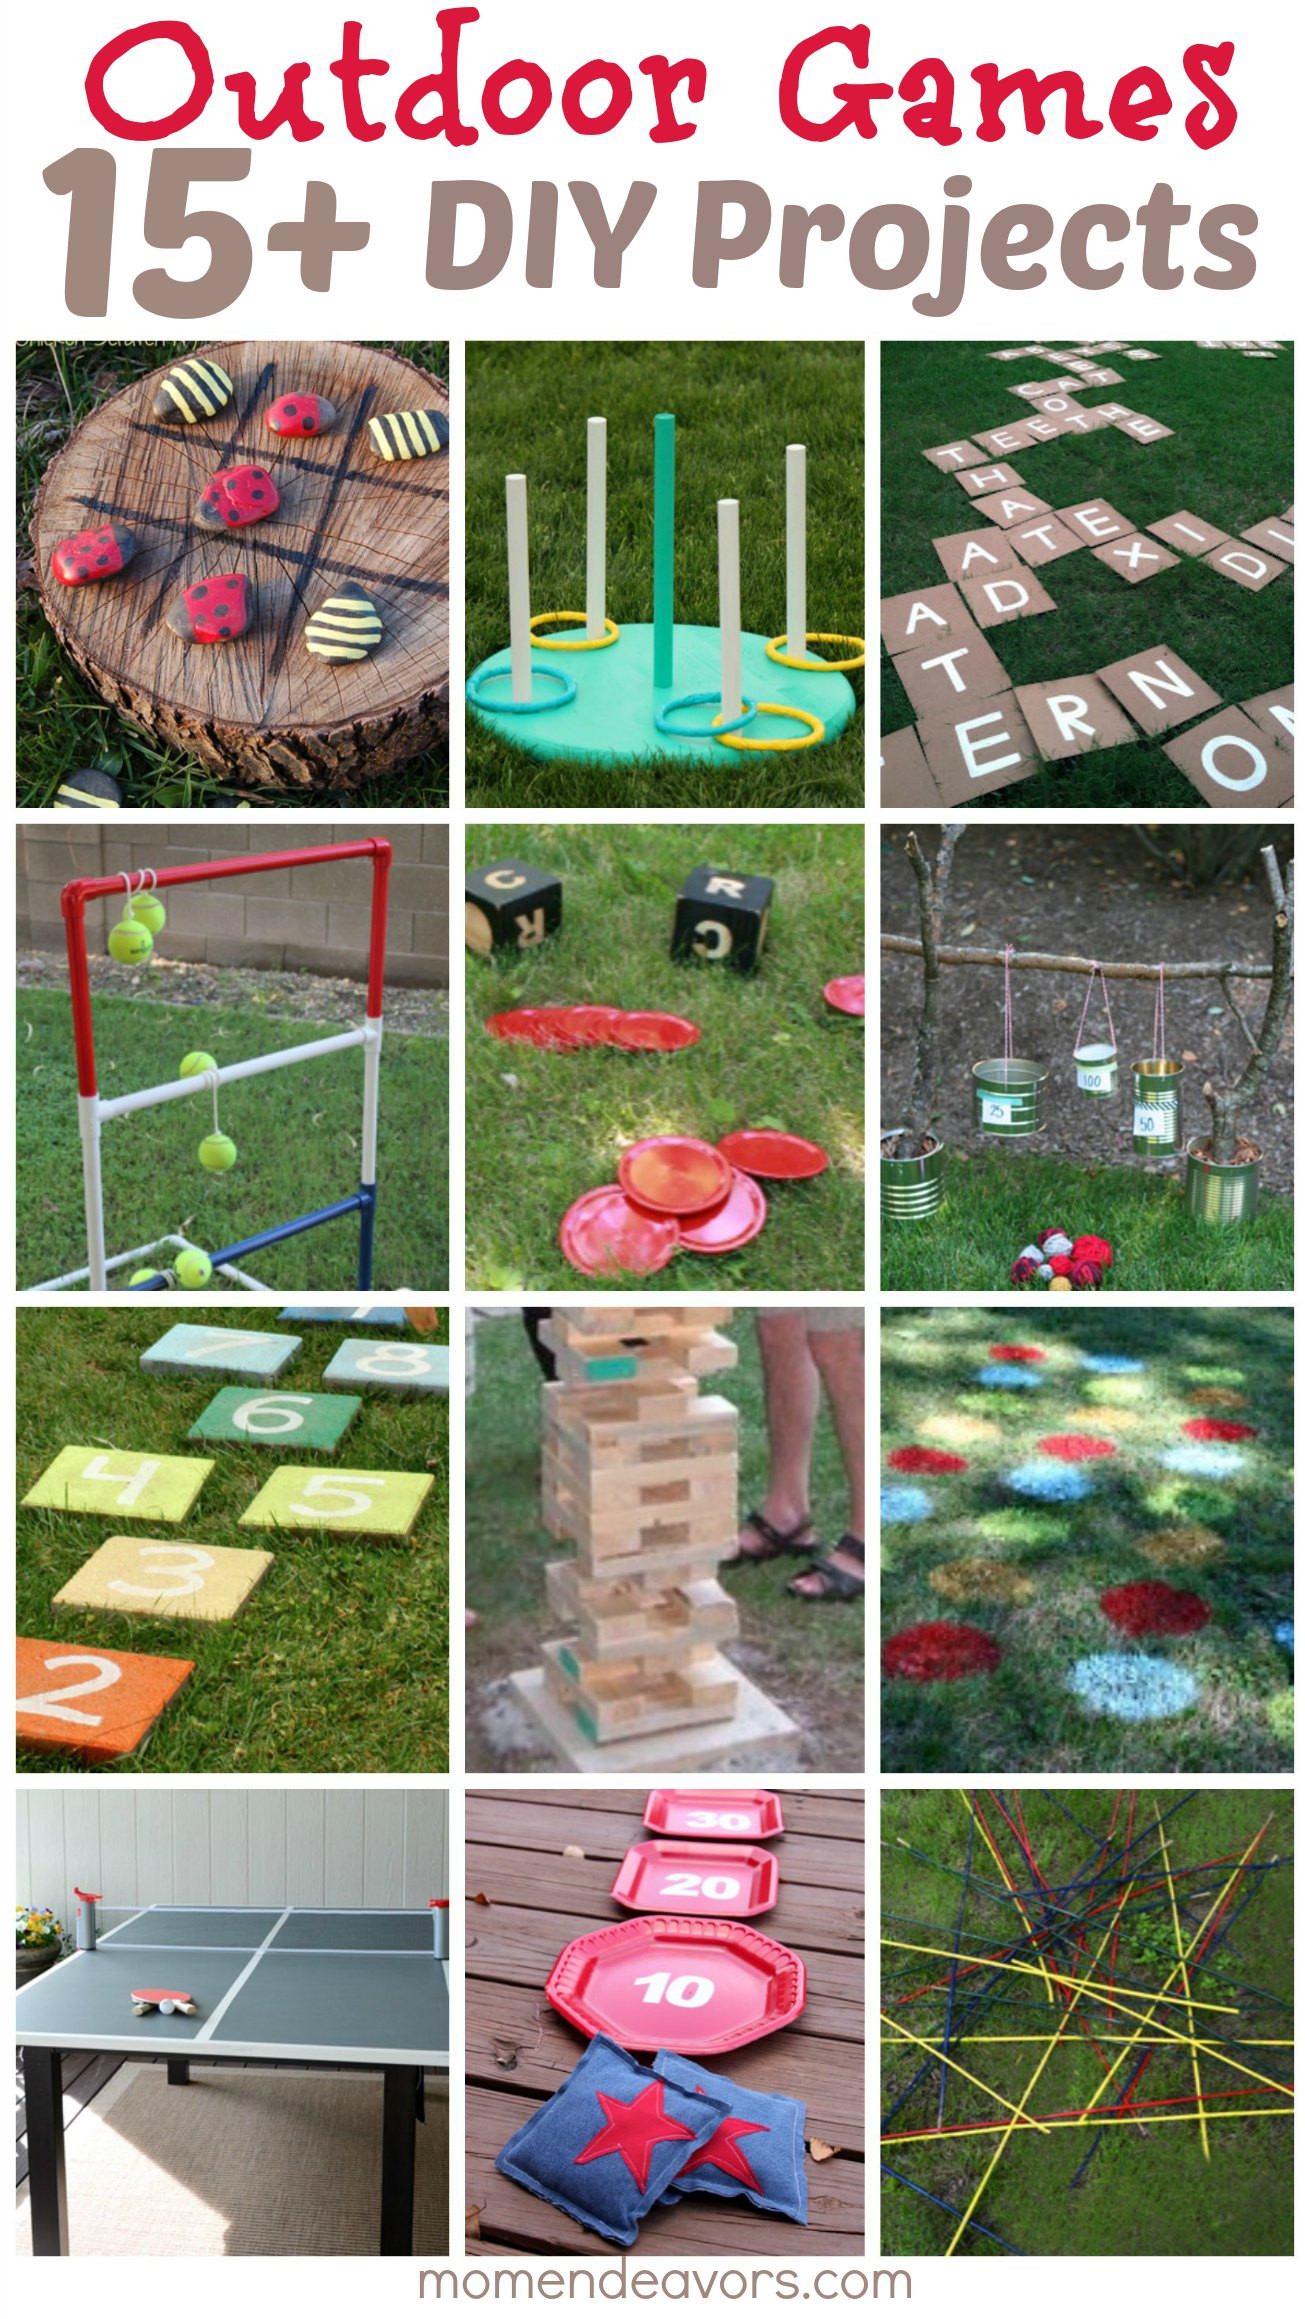 DIY Outdoor Games For Kids
 DIY Outdoor Games – 15 Awesome Project Ideas for Backyard